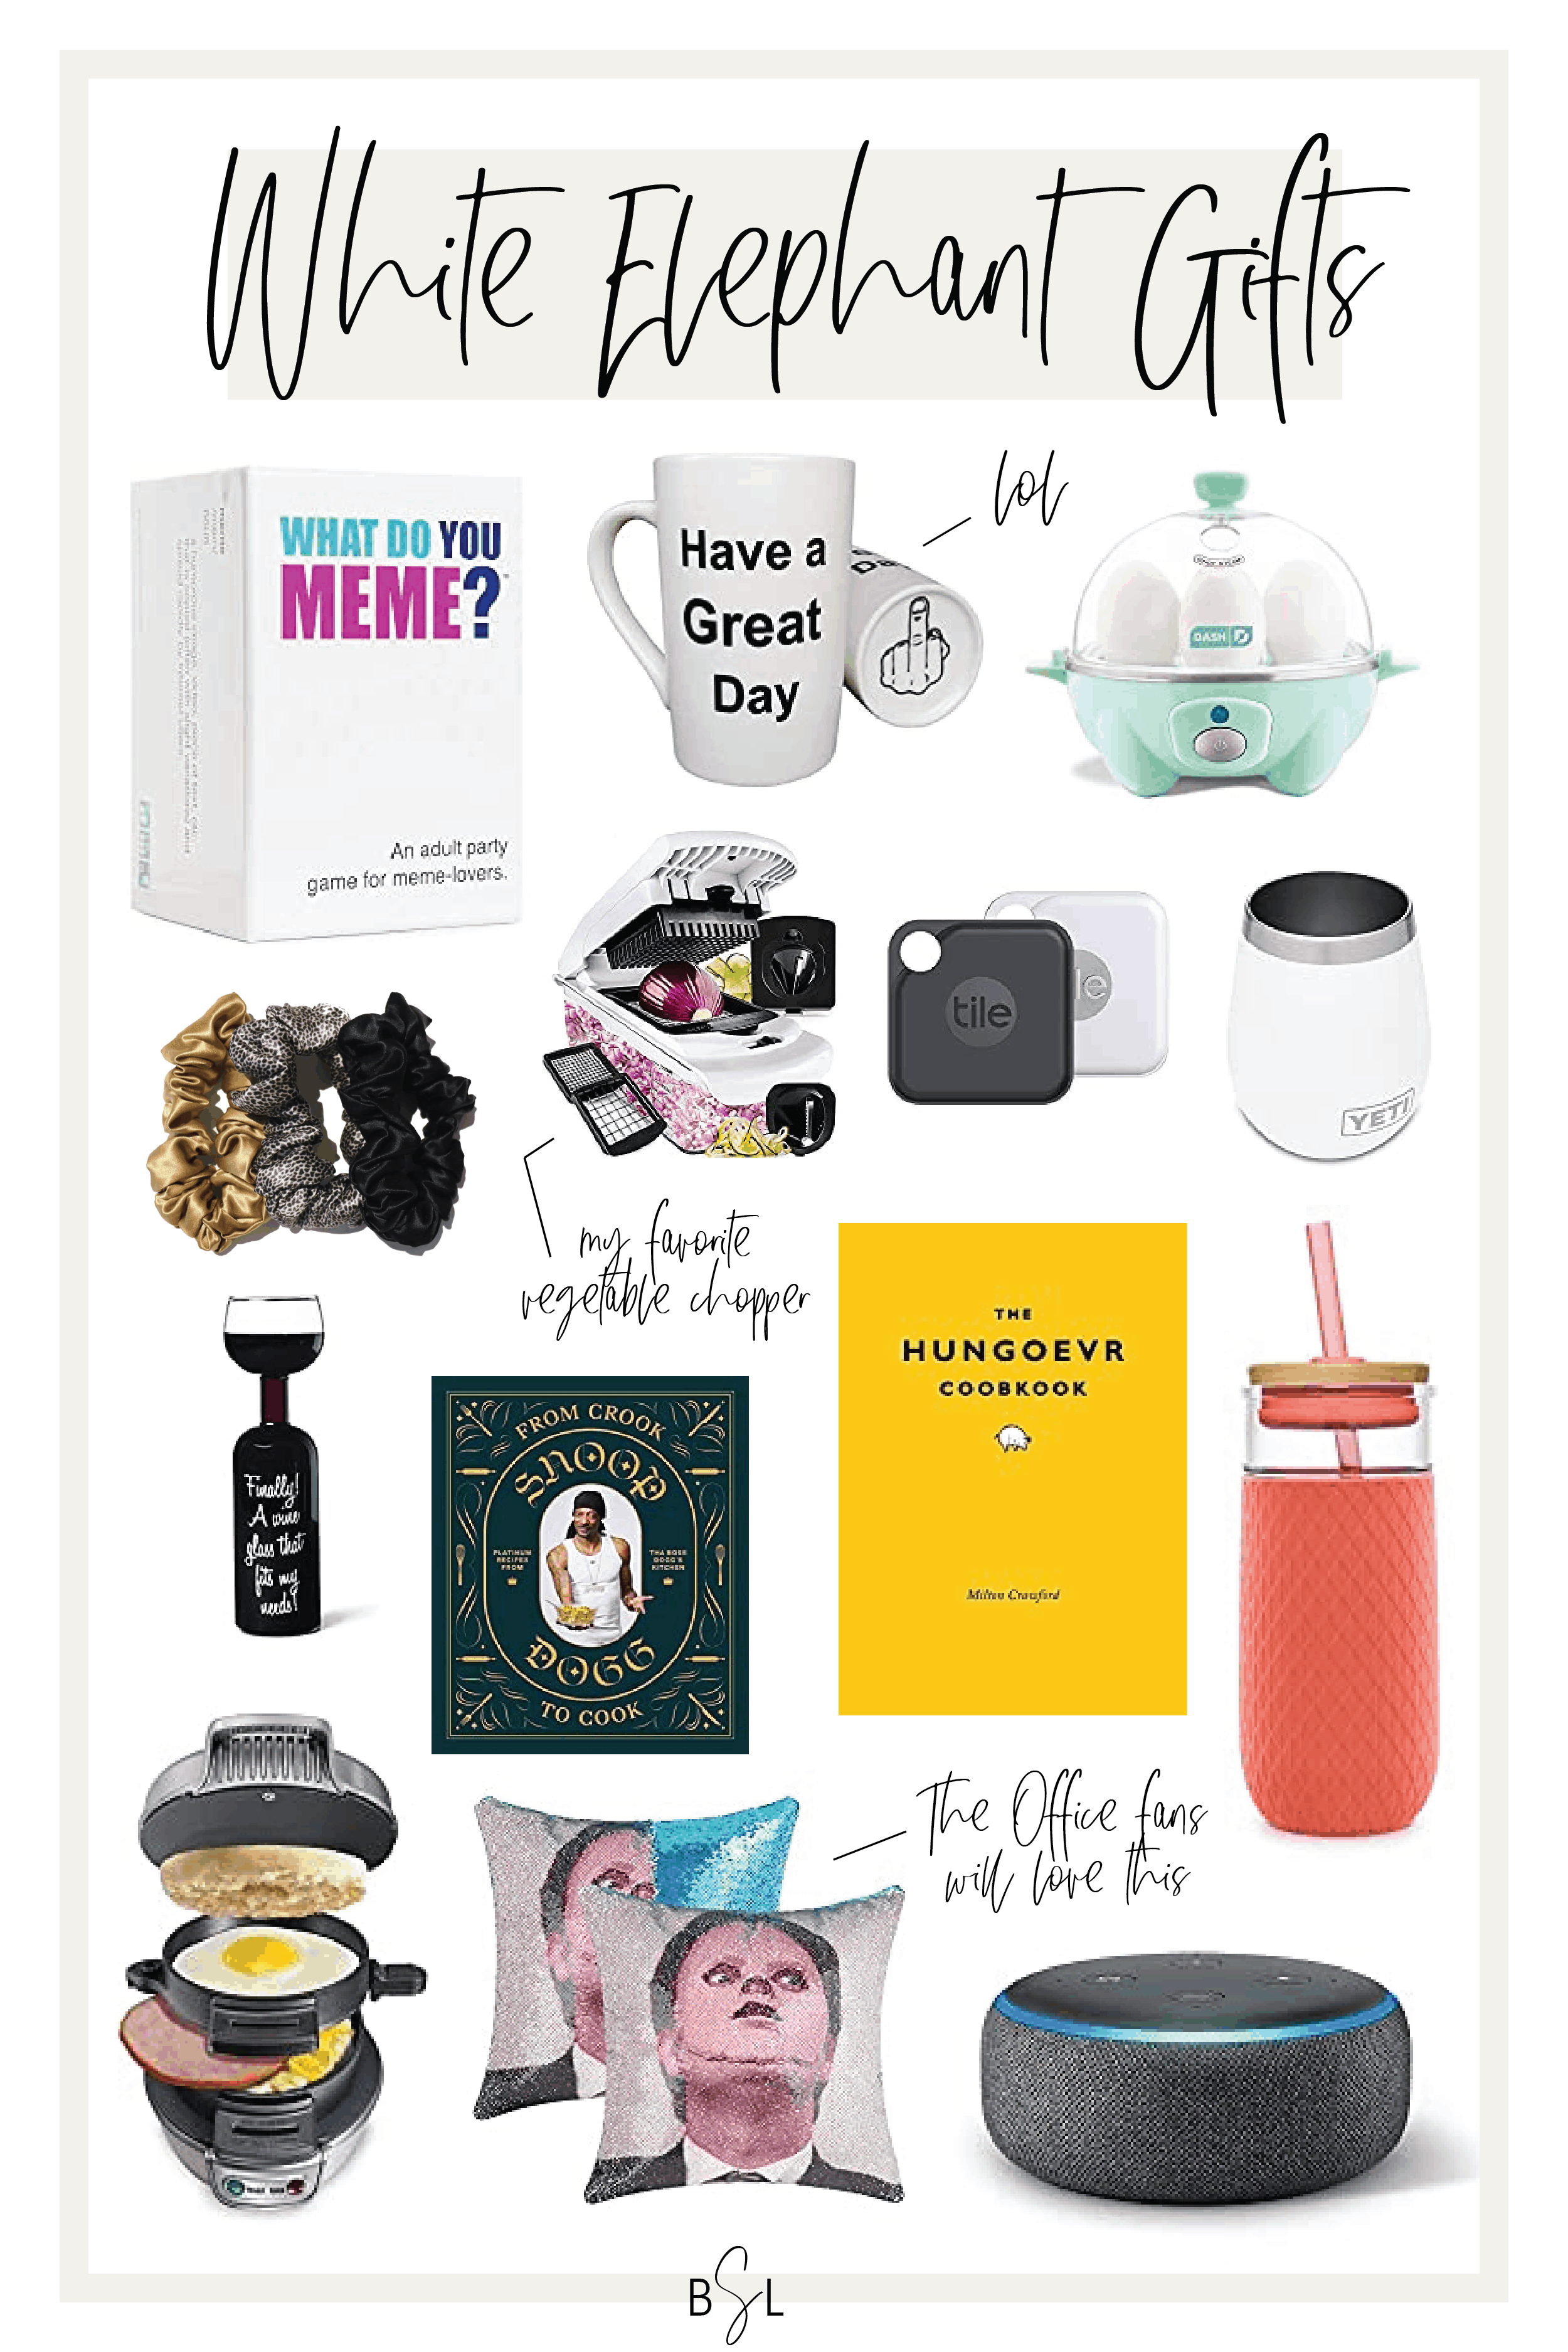 https://bysophialee.com/wp-content/uploads/white-elephant-gifts-2.png